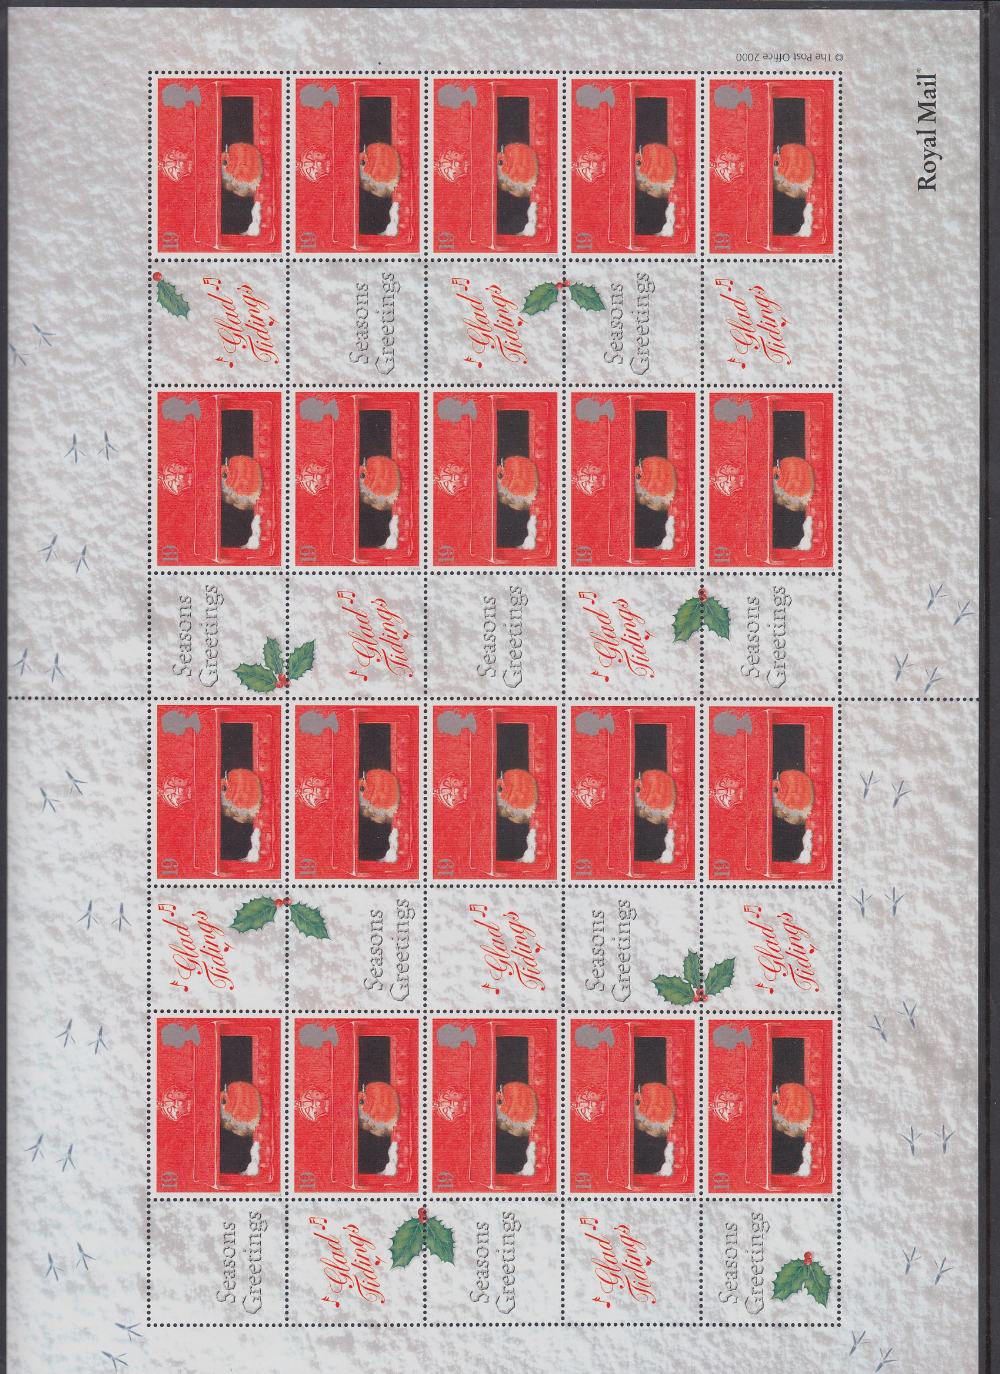 GREAT BRITAIN STAMPS 2000 Christmas smiler sheet pair in excellent condition Cat £250 - Image 3 of 3